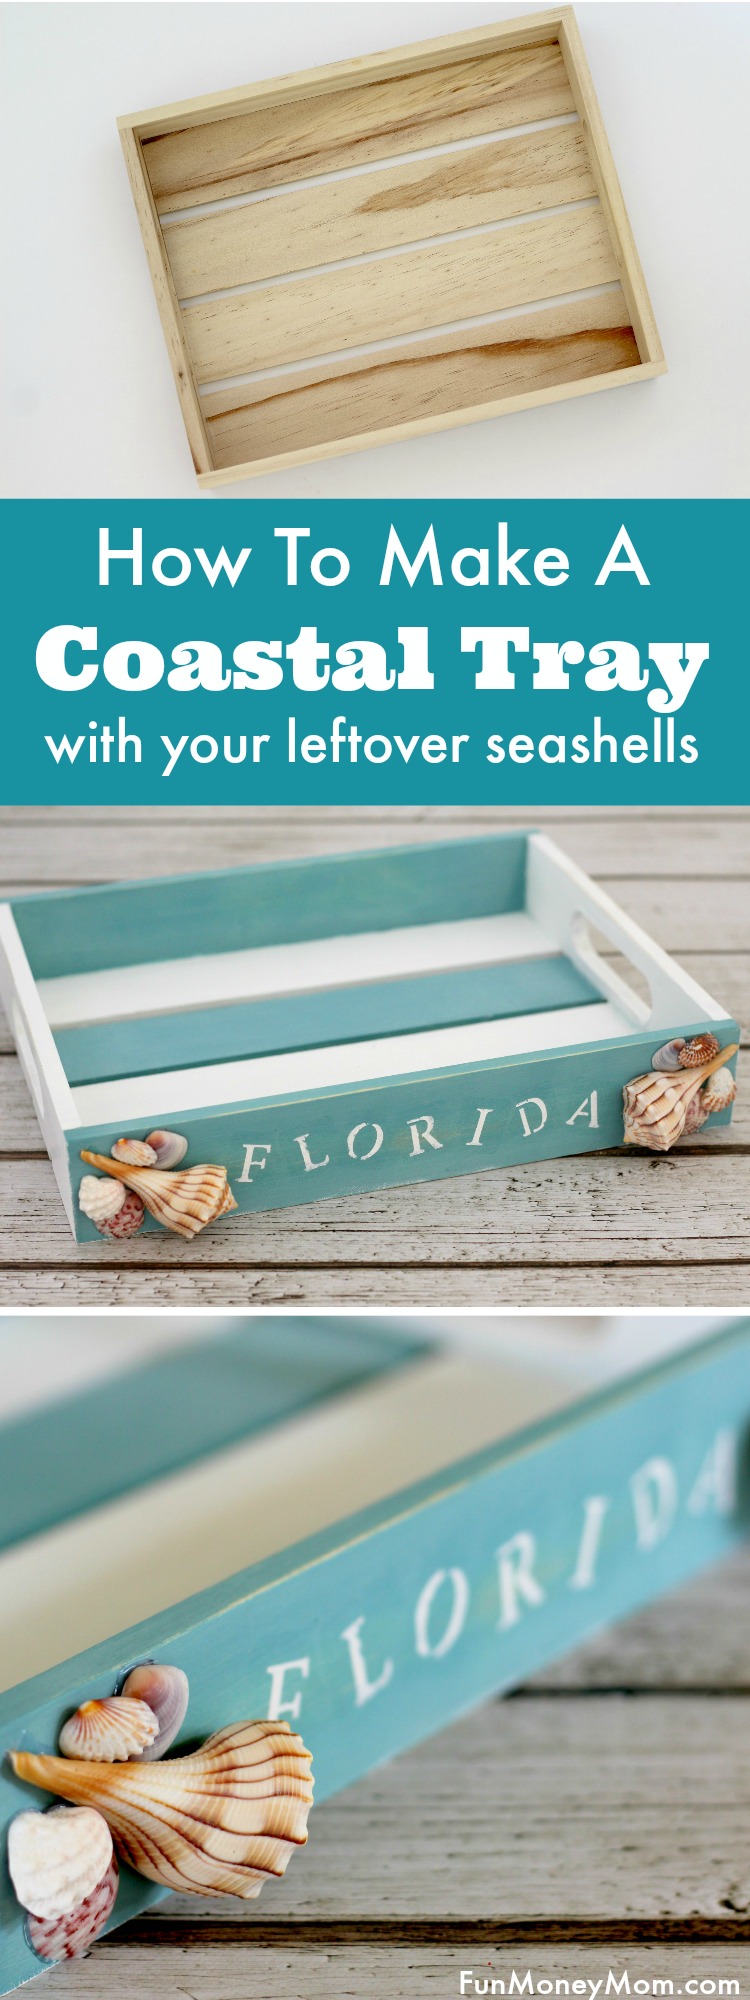 Trying to figure out what to do with all those pretty seashells you found at the beach? Why not make this cute, and useful, coastal tray!